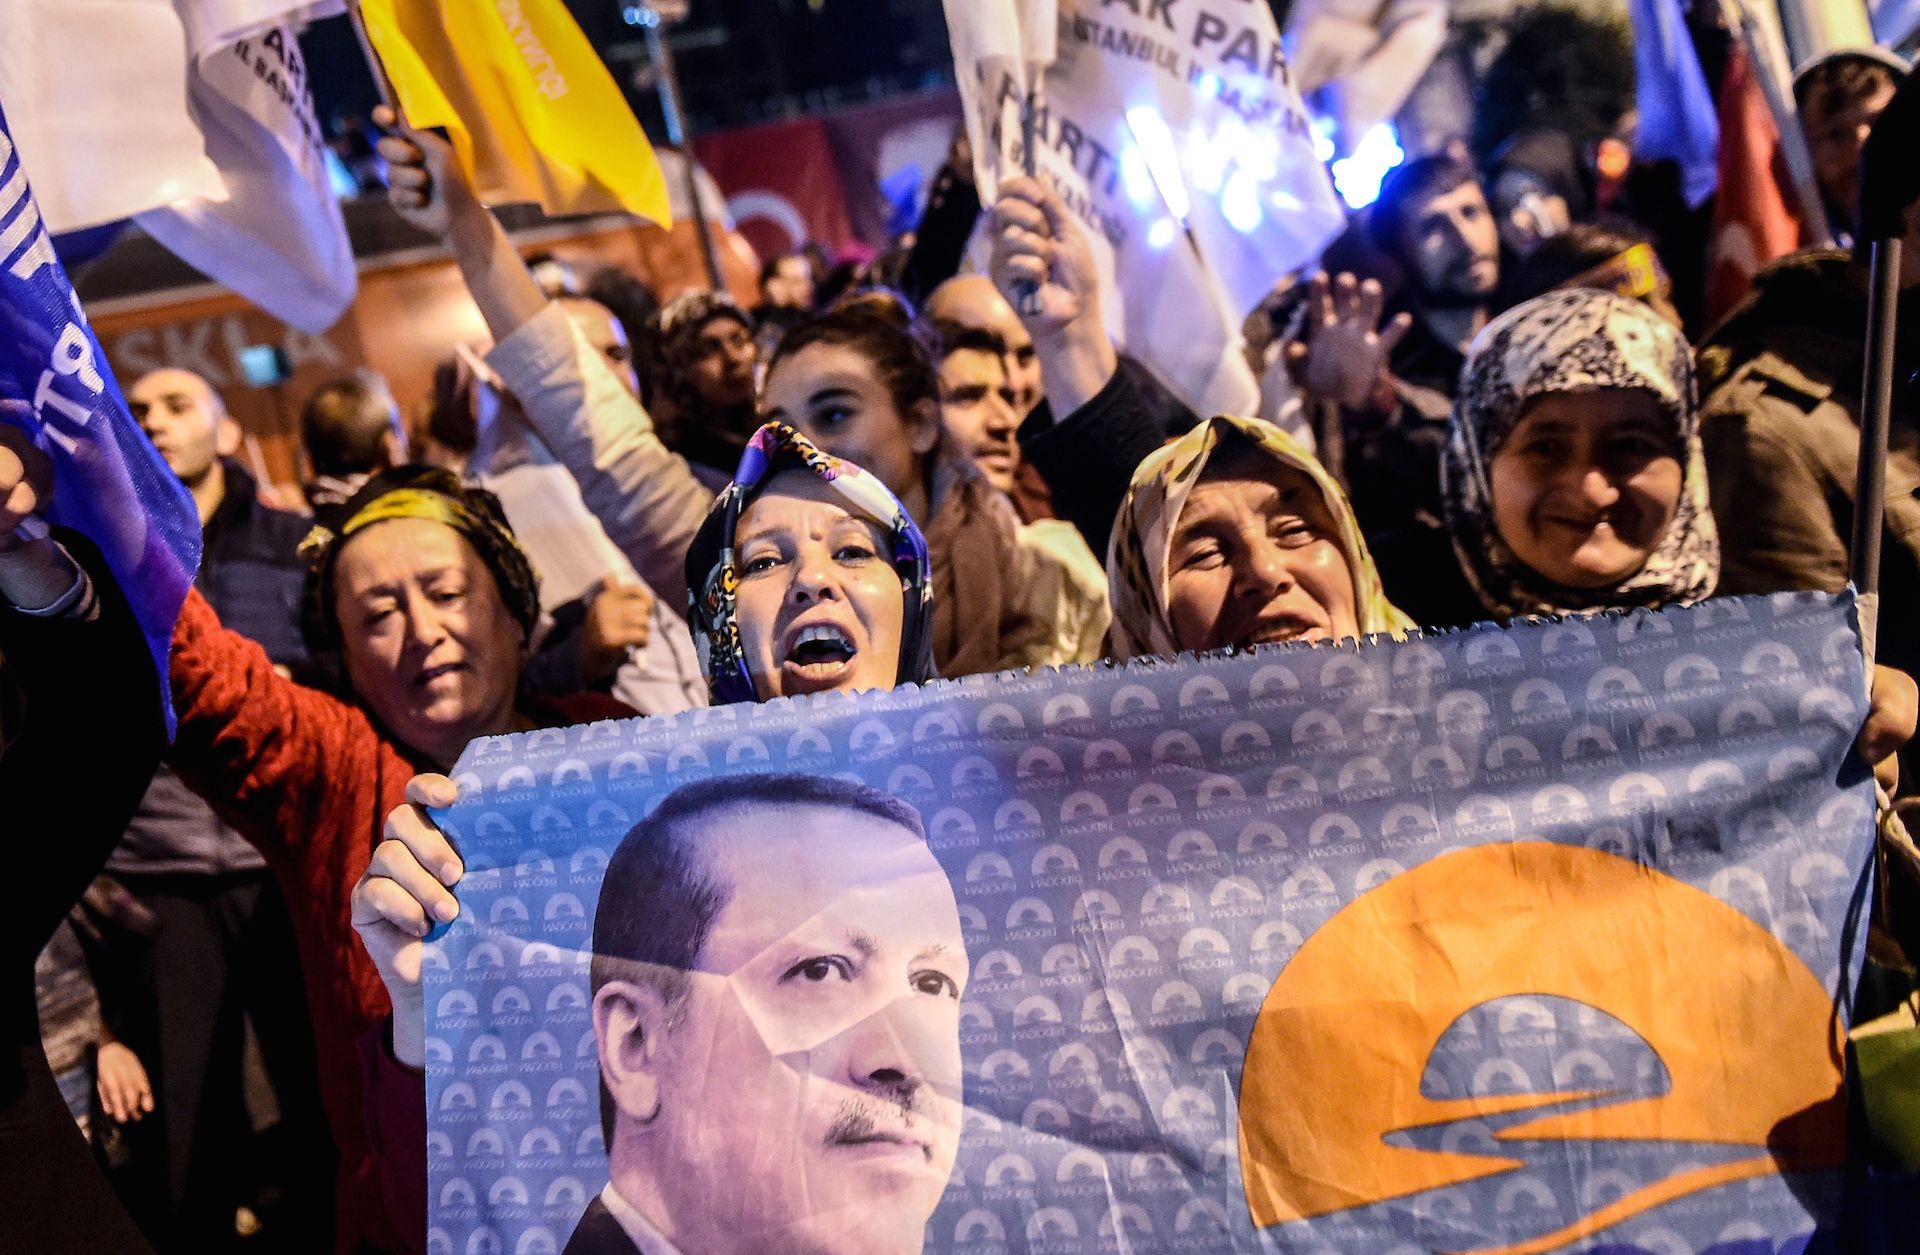 Supporters of Turkey's Justice and Development Party (AKP) celebrate in Istanbul